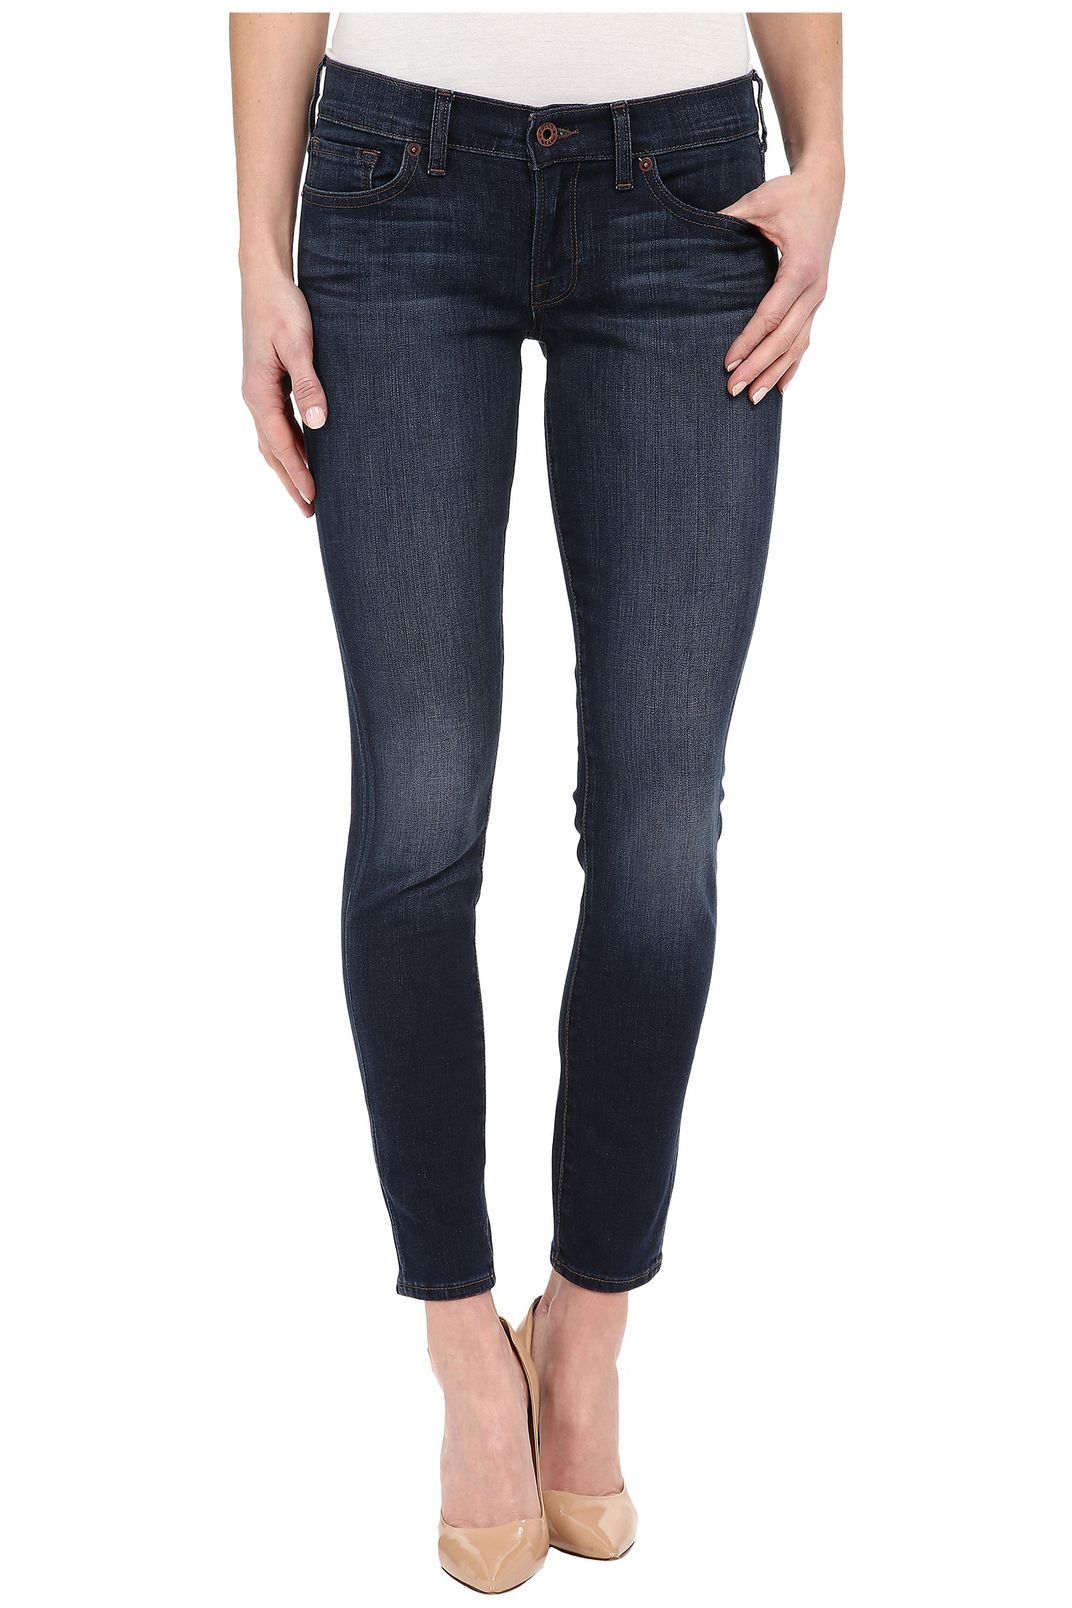 Best Jeans for Women of All Sizes and Styles